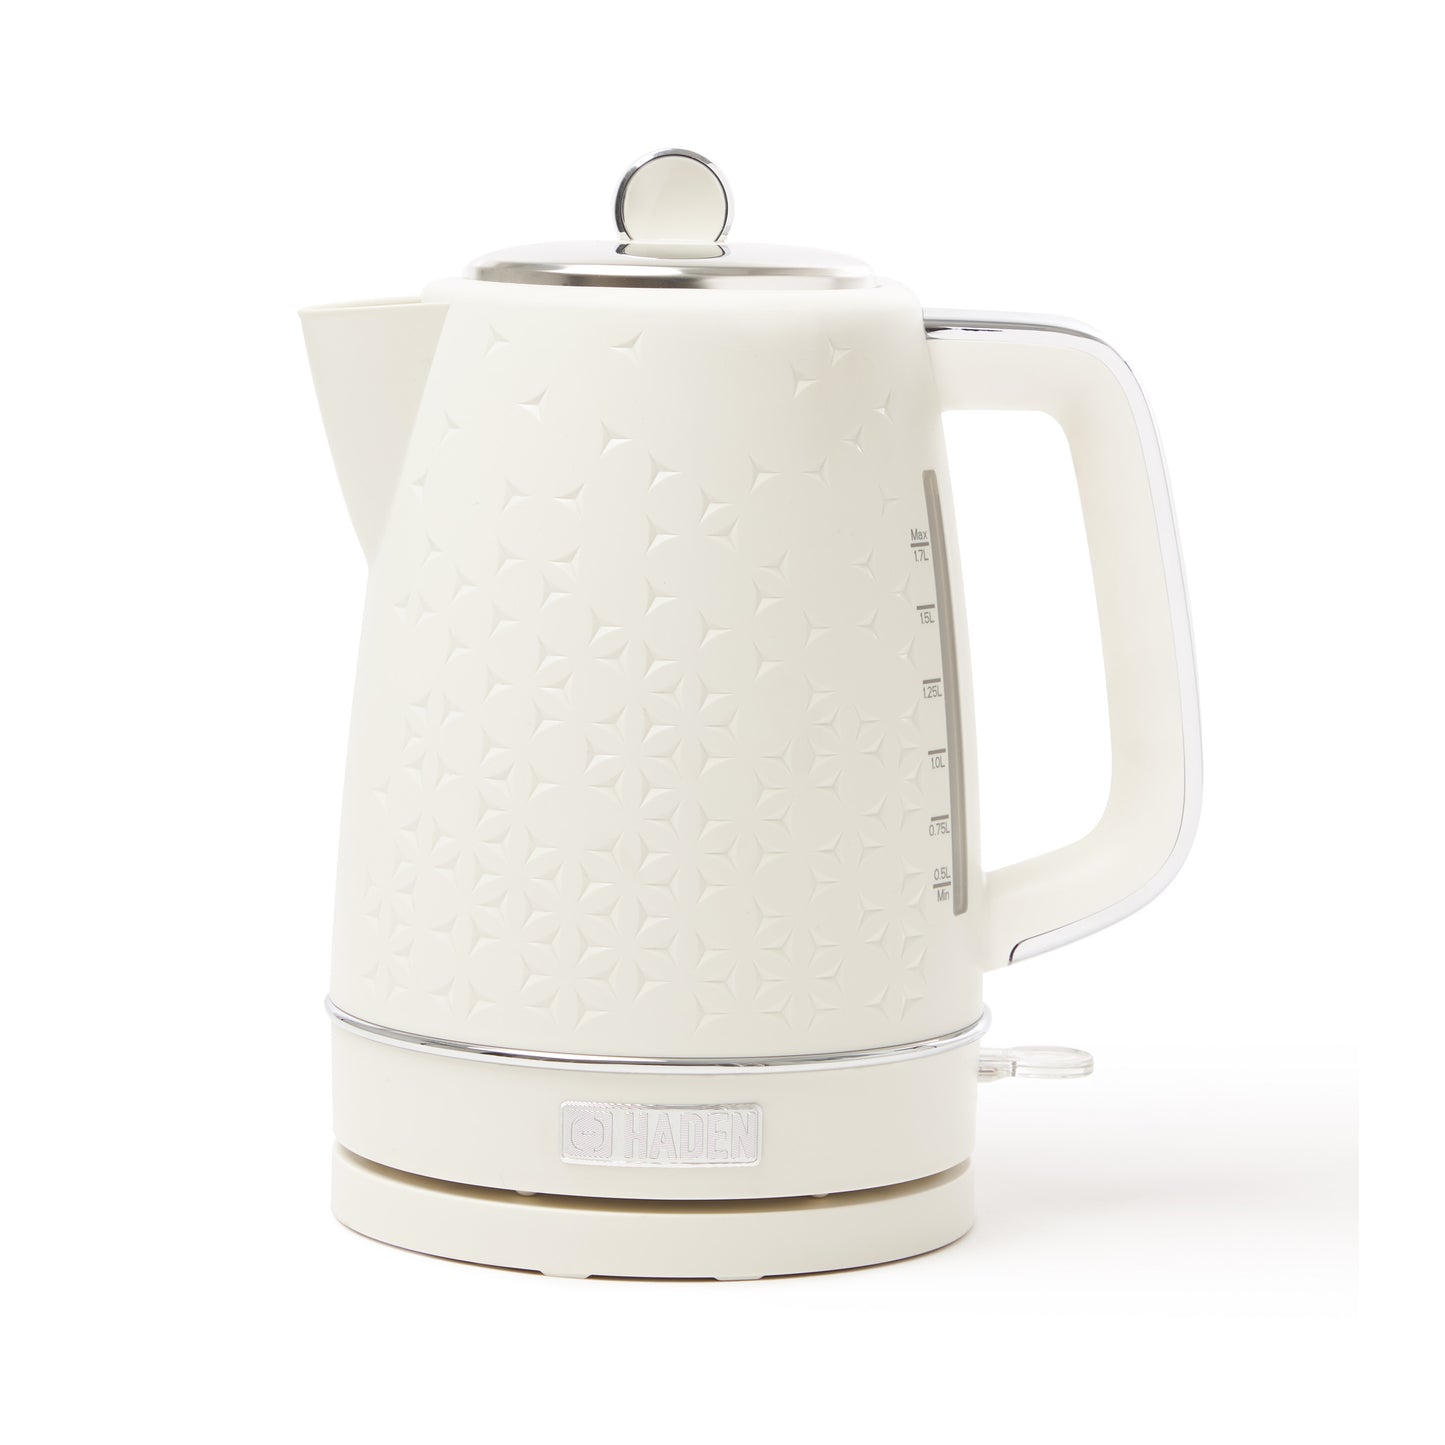 Haden Starbeck Ivory Kettle